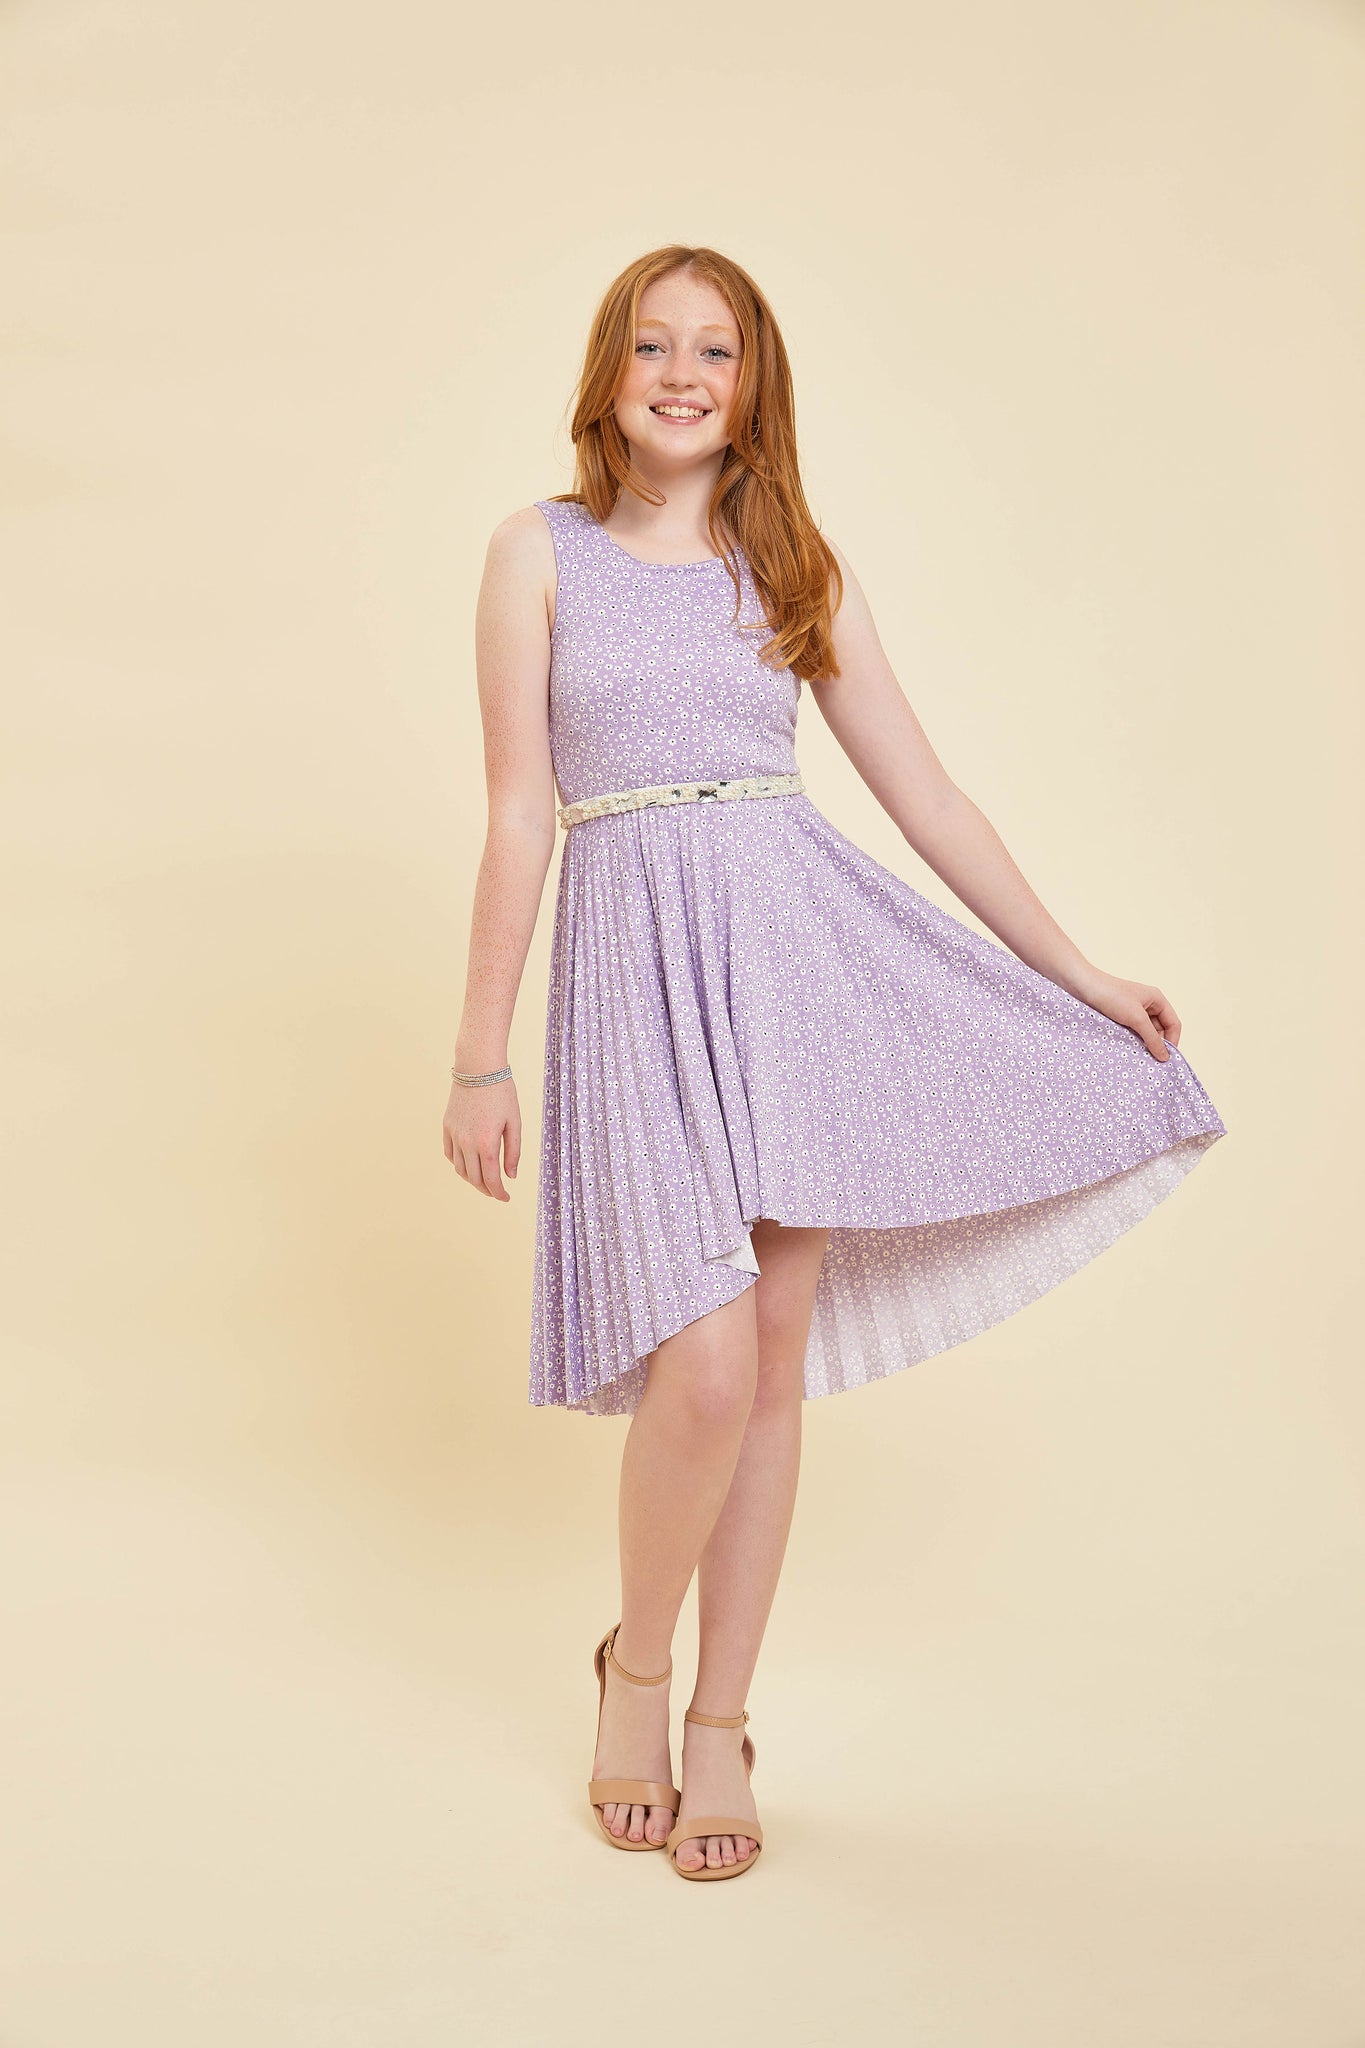 Red head in a lilac floral pleated dress with belt and nude shoe.